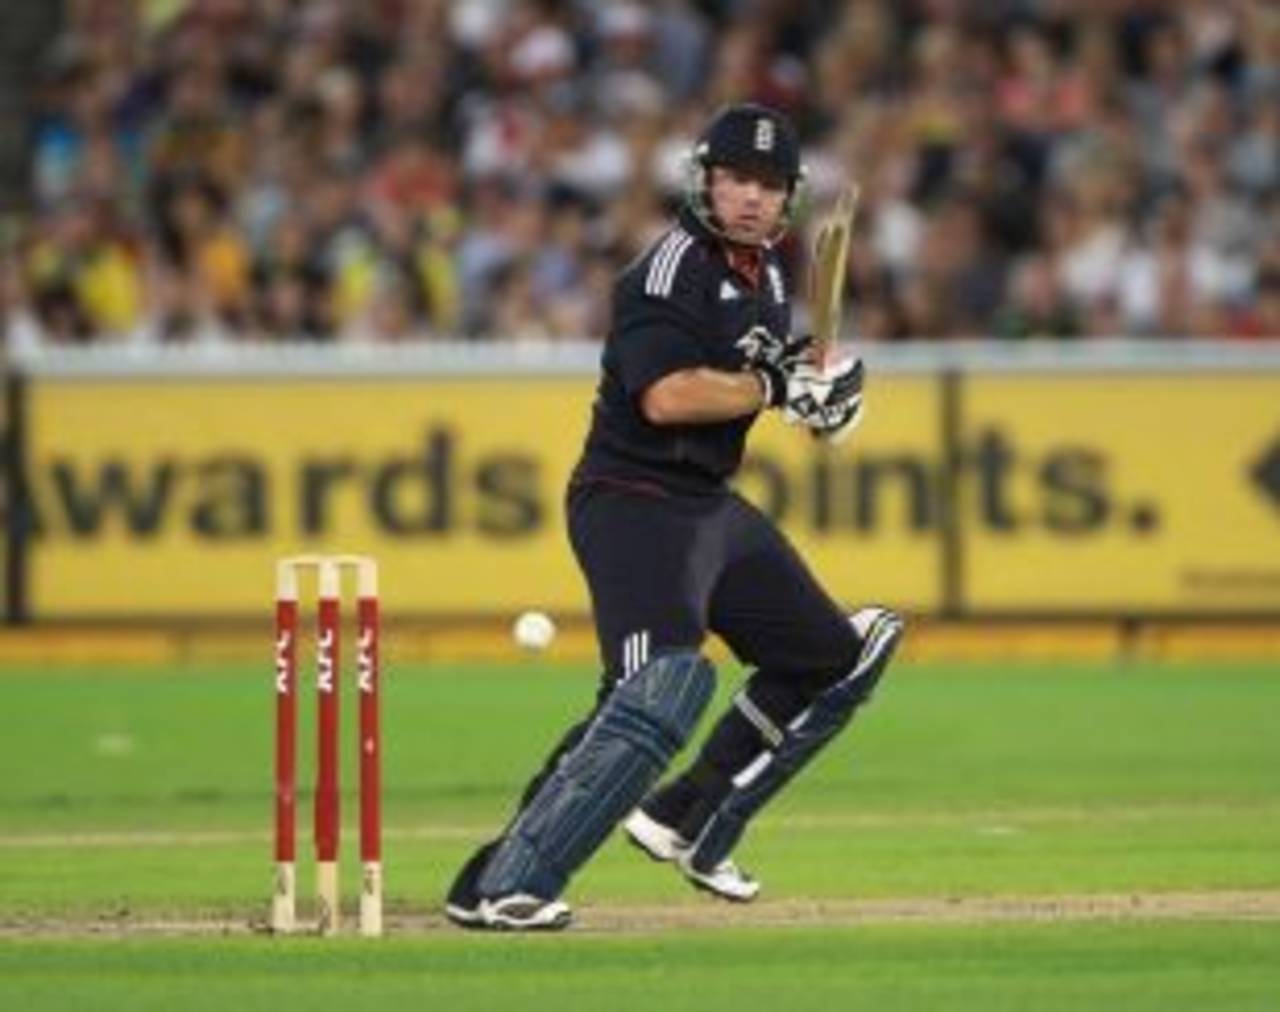 Ian Bell launched England's run-chase with a brisk 39 from 30 balls, Australia v England, 2nd Twenty20, Melbourne, January 14, 2011